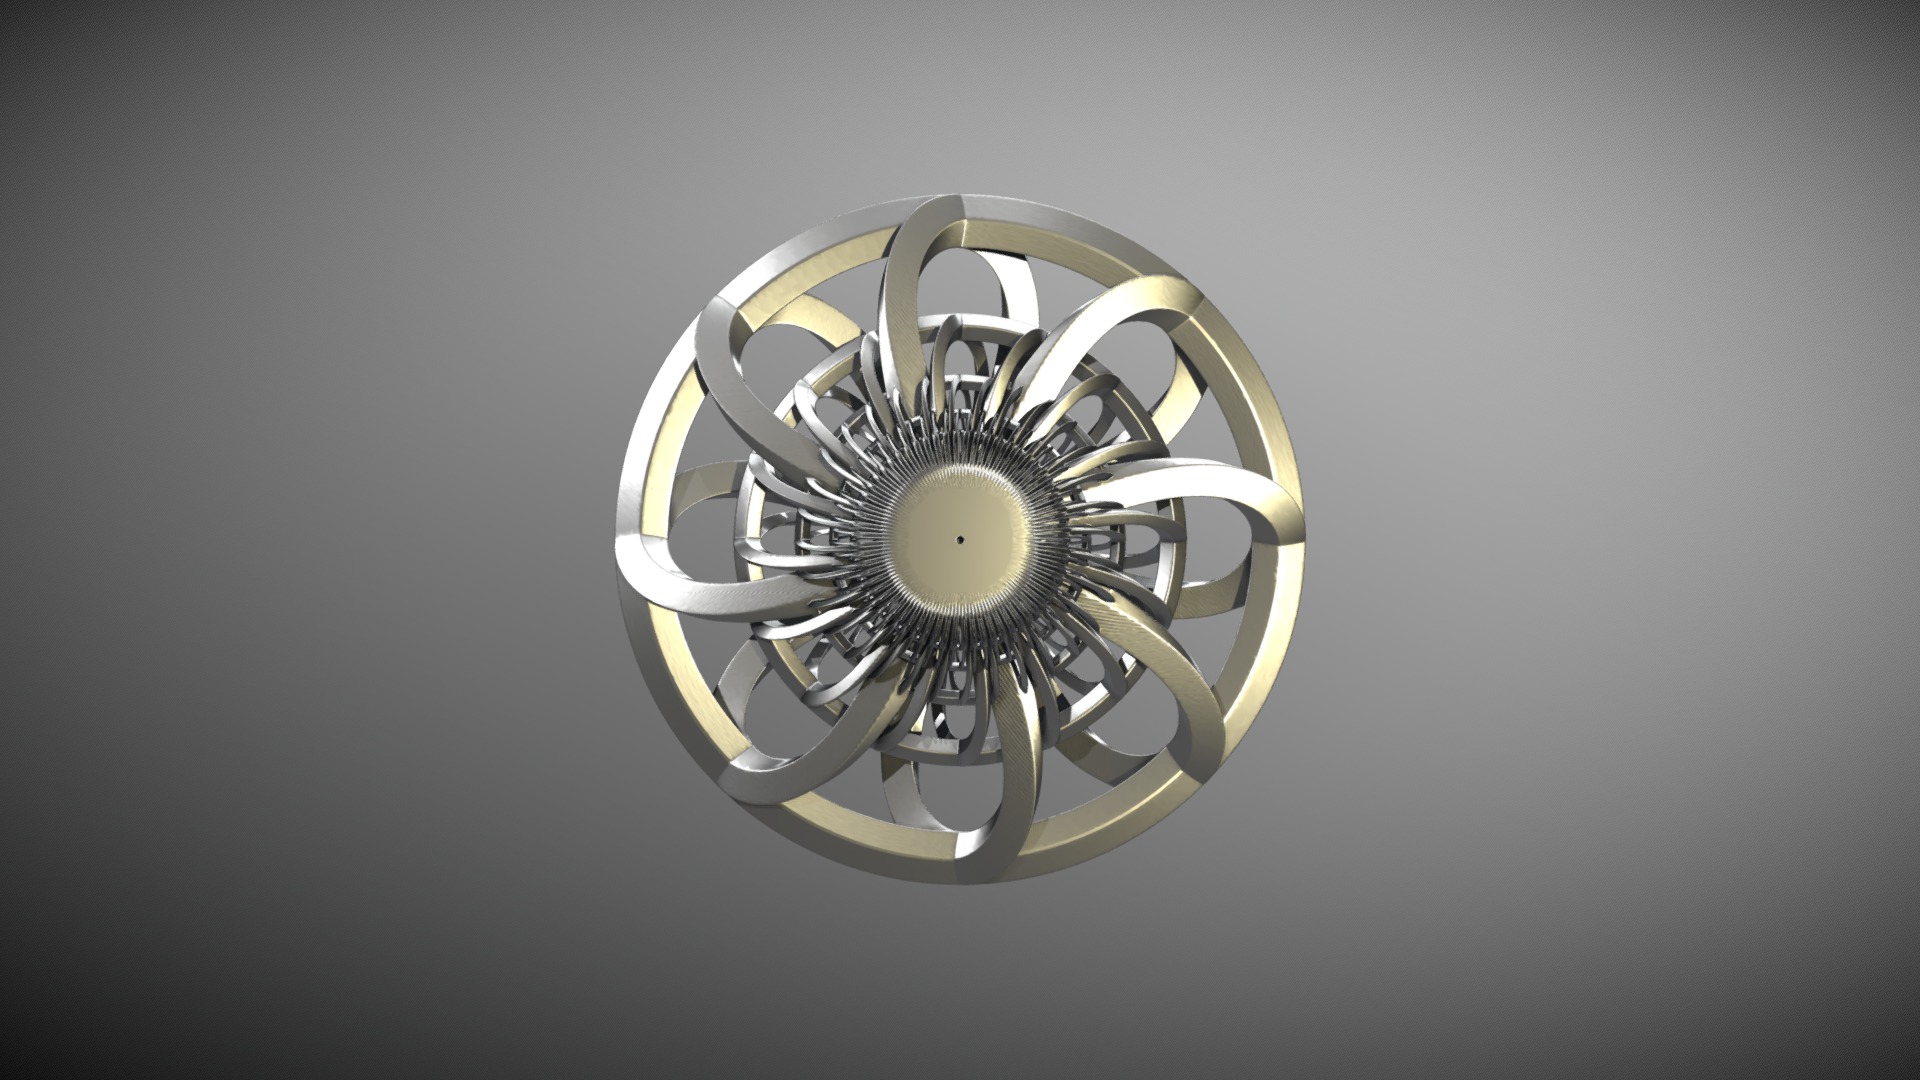 3D model 8 ∞s - This is a 3D model of the 8 ∞s. The 3D model is about a silver and black fan.